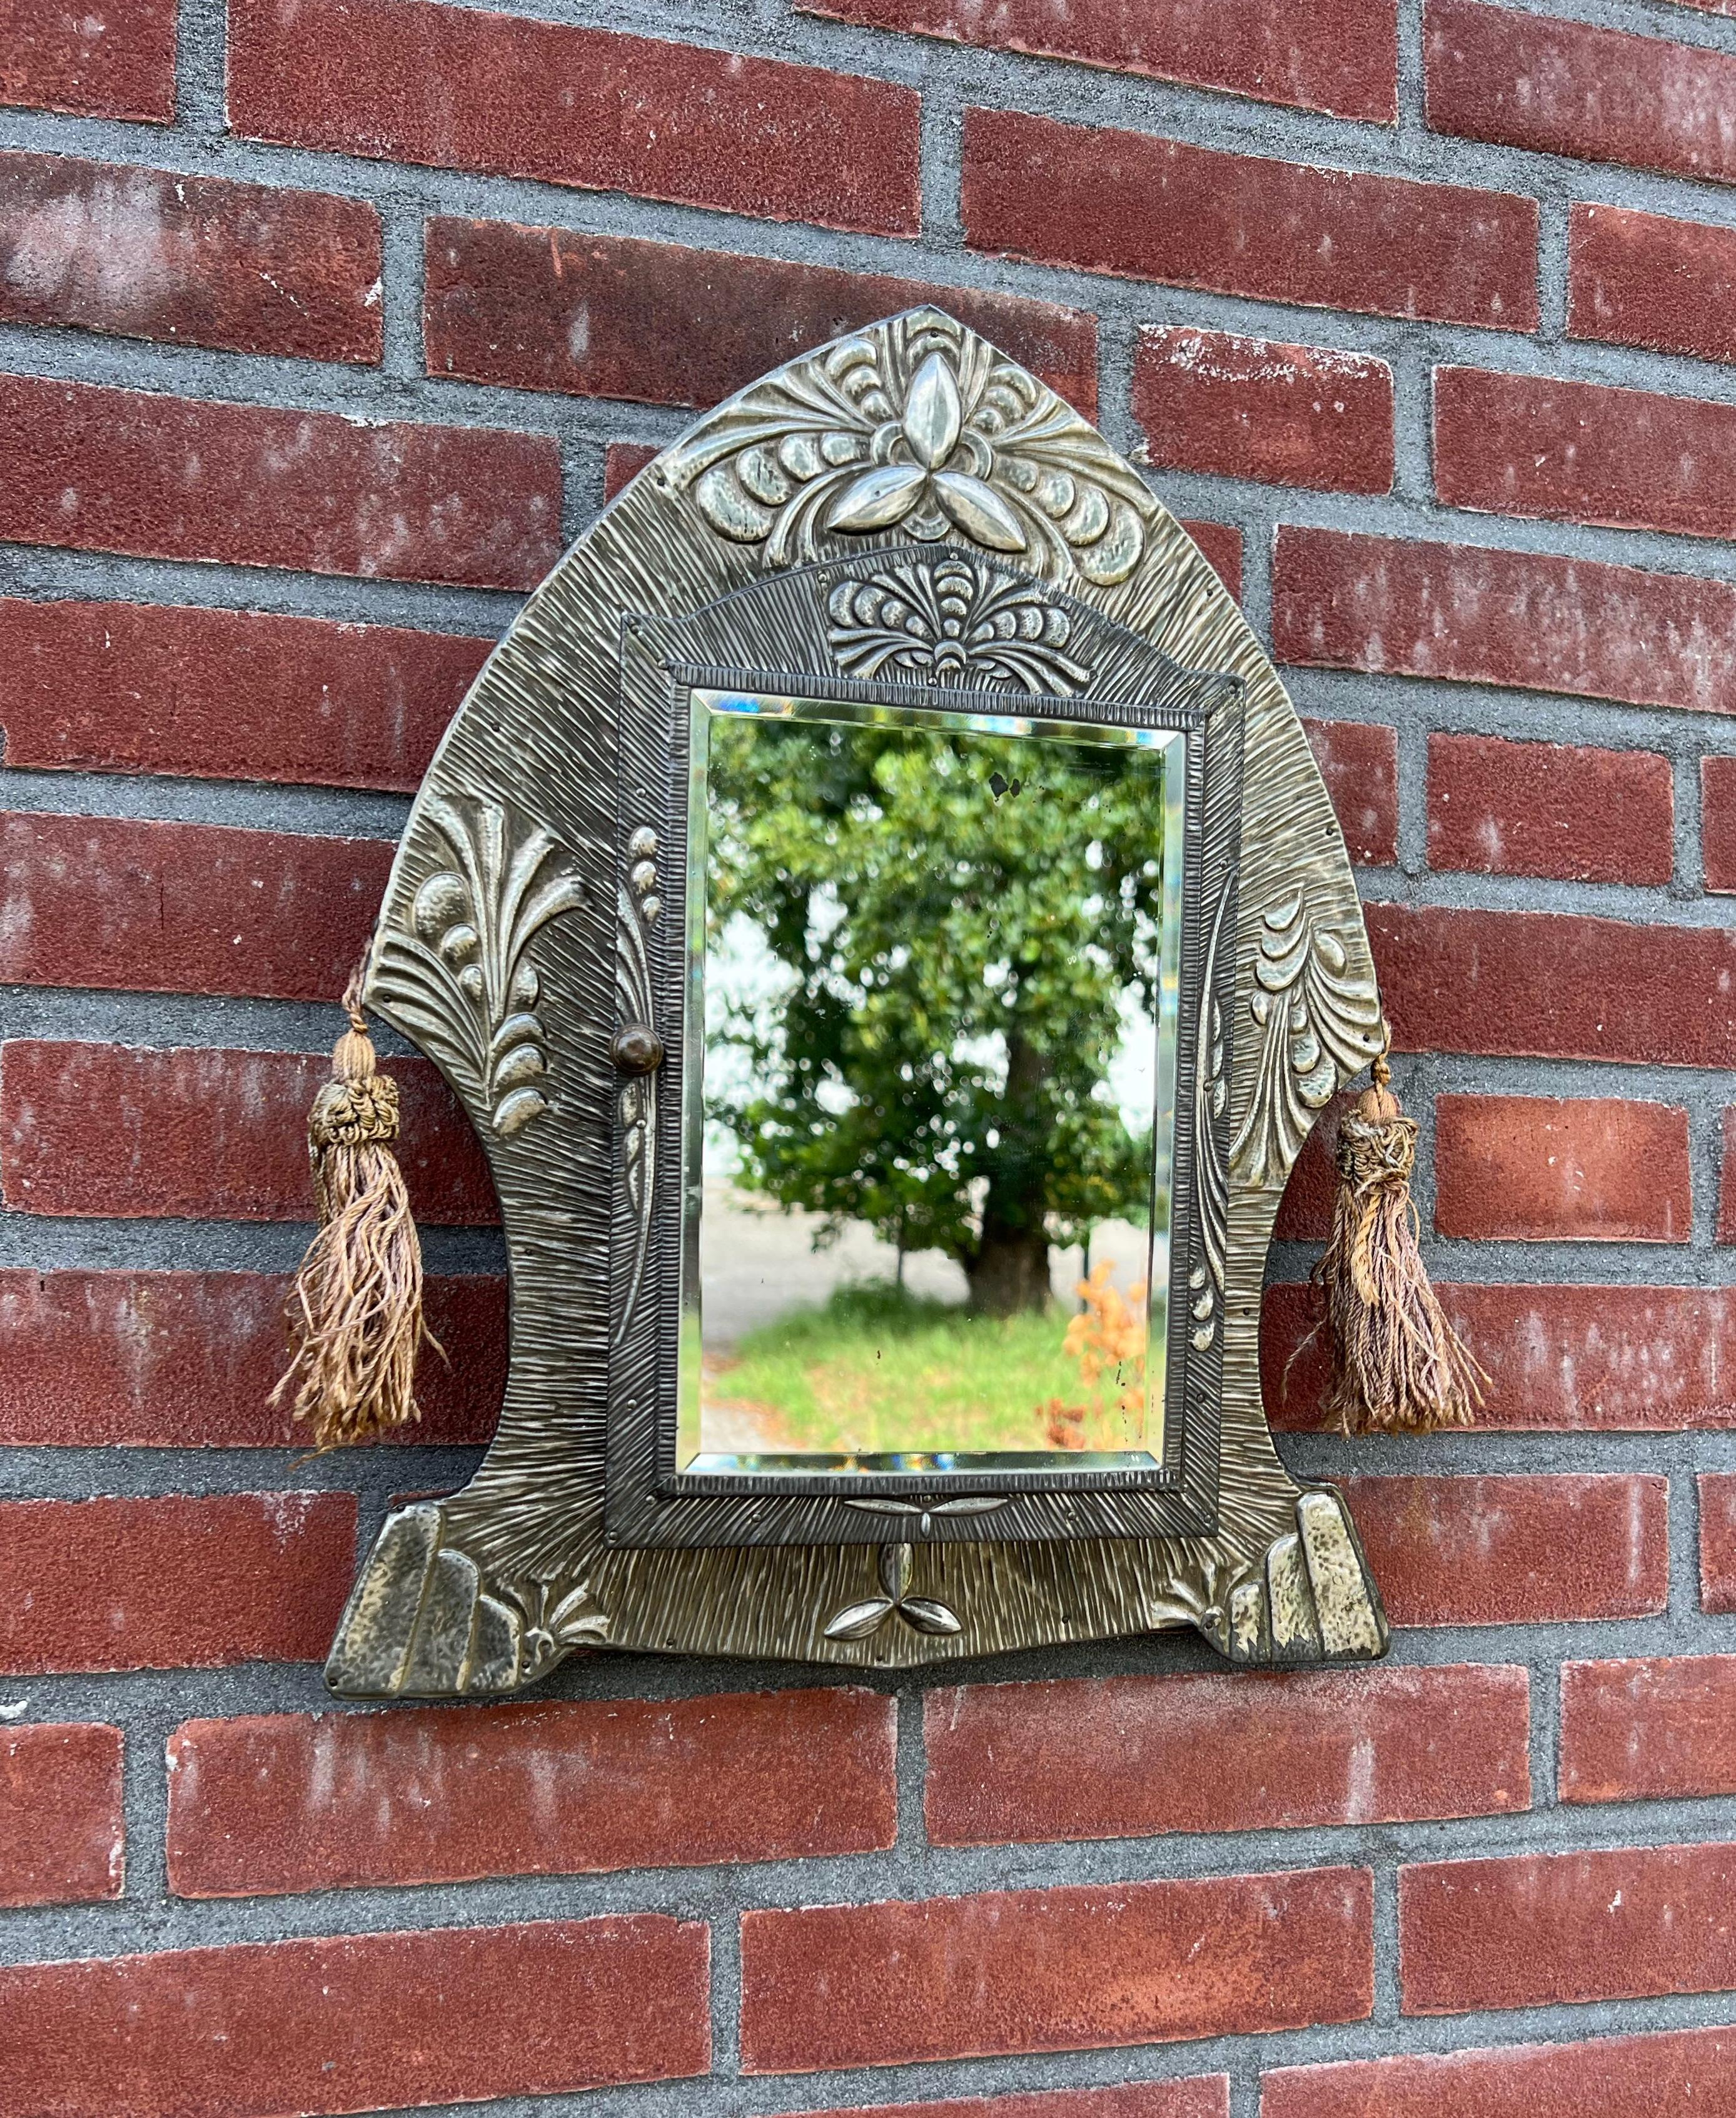 Great quality and condition wall key or brush cabinet from 1930.

This Arts & Crafts style wall cabinet can be used for all kinds of purposes and the stunning, beveled mirror is a real bonus. The handcrafted artwork in the form of carefully